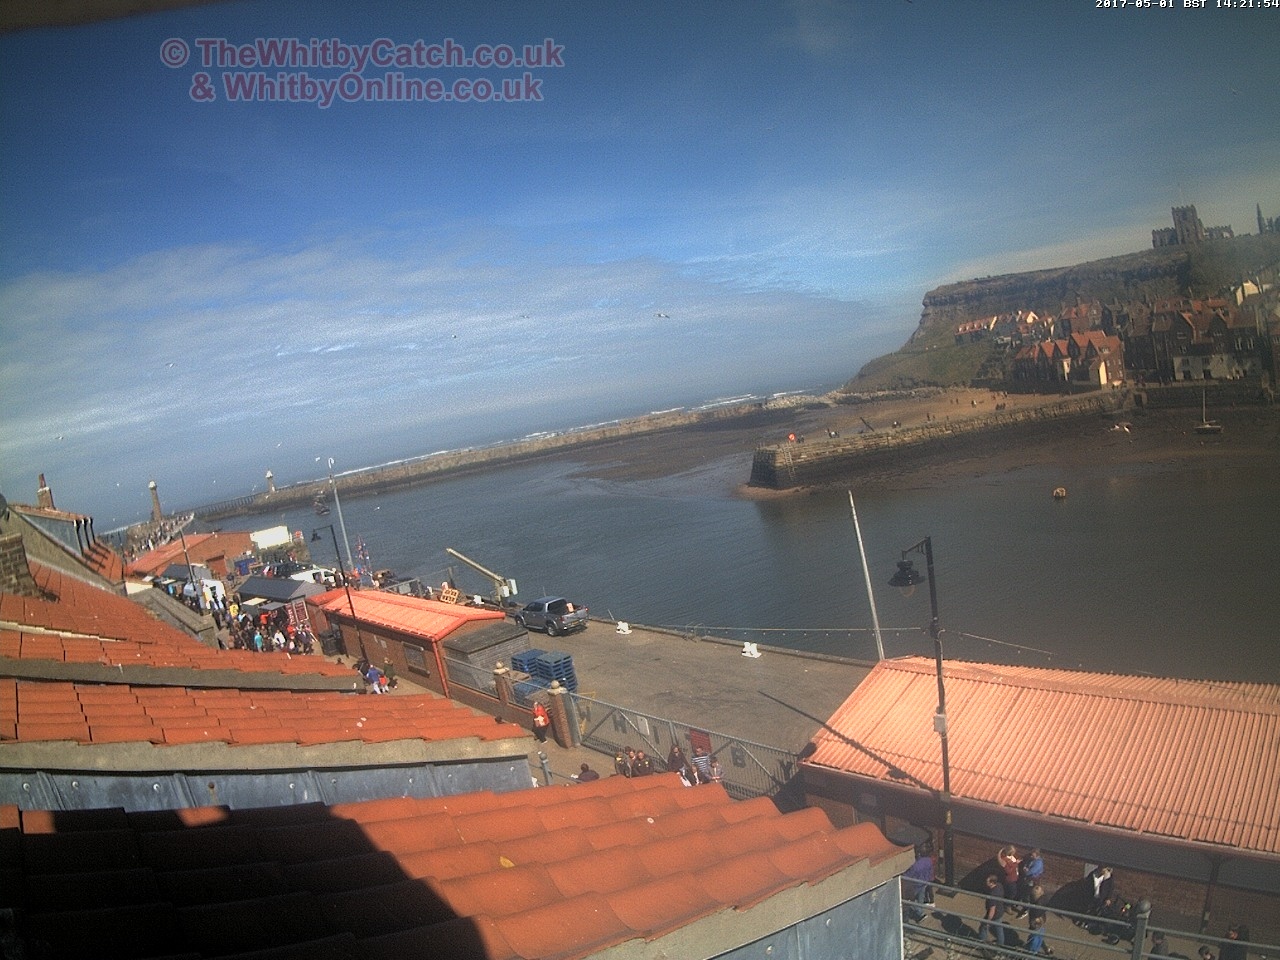 Whitby Mon 1st May 2017 14:22.